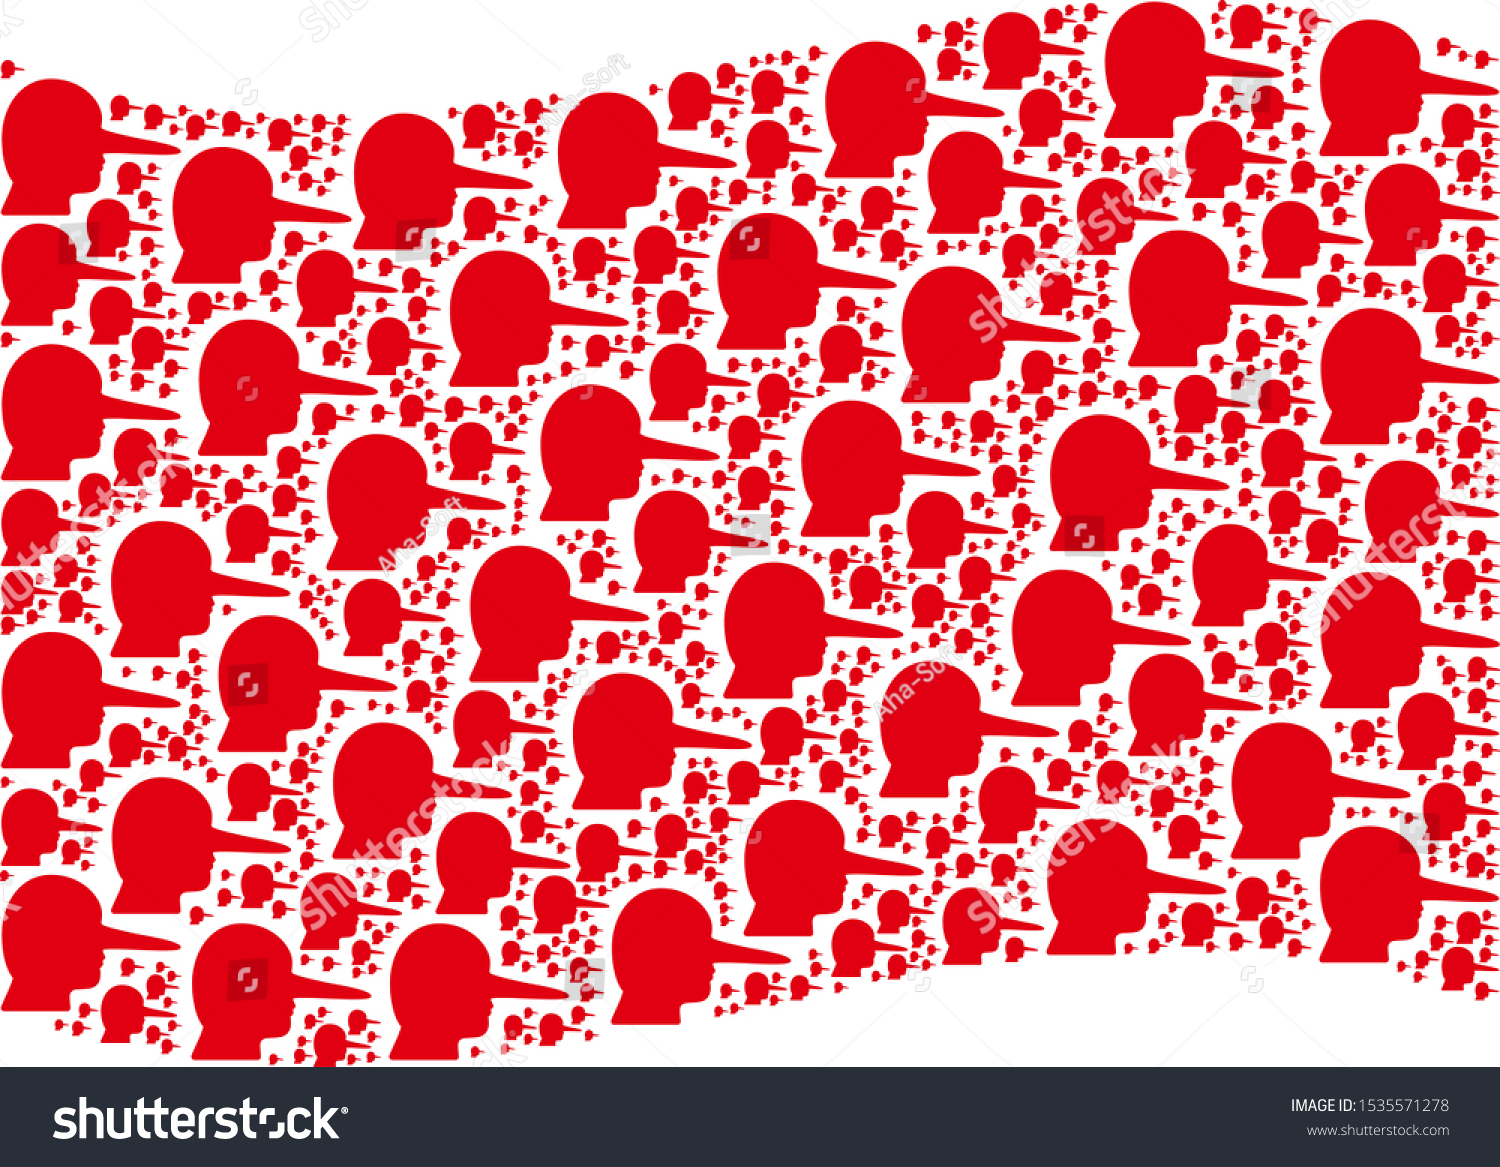 SVG of Waving red flag collage. Vector lier design elements are arranged into mosaic red waving flag collage. Patriotic collage combined of flat lier elements. svg